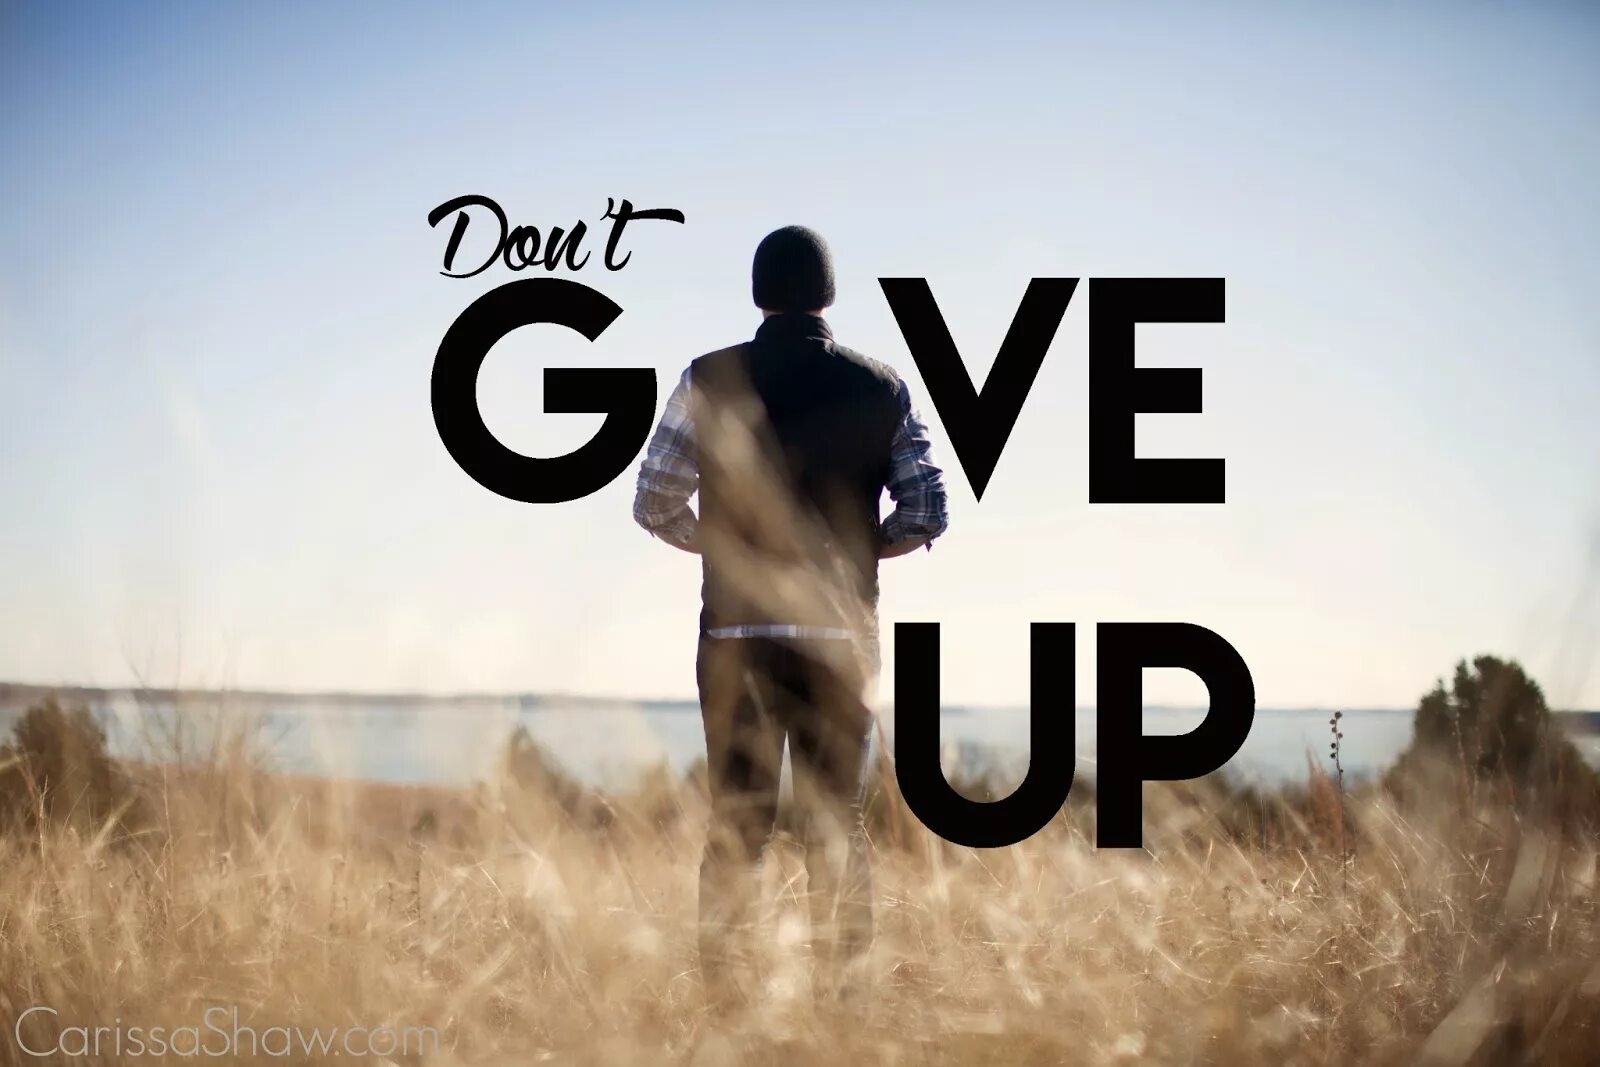 Keep the come up. Don't give up картинка. Надпись don't give up. Never give up. Never give up картинки.